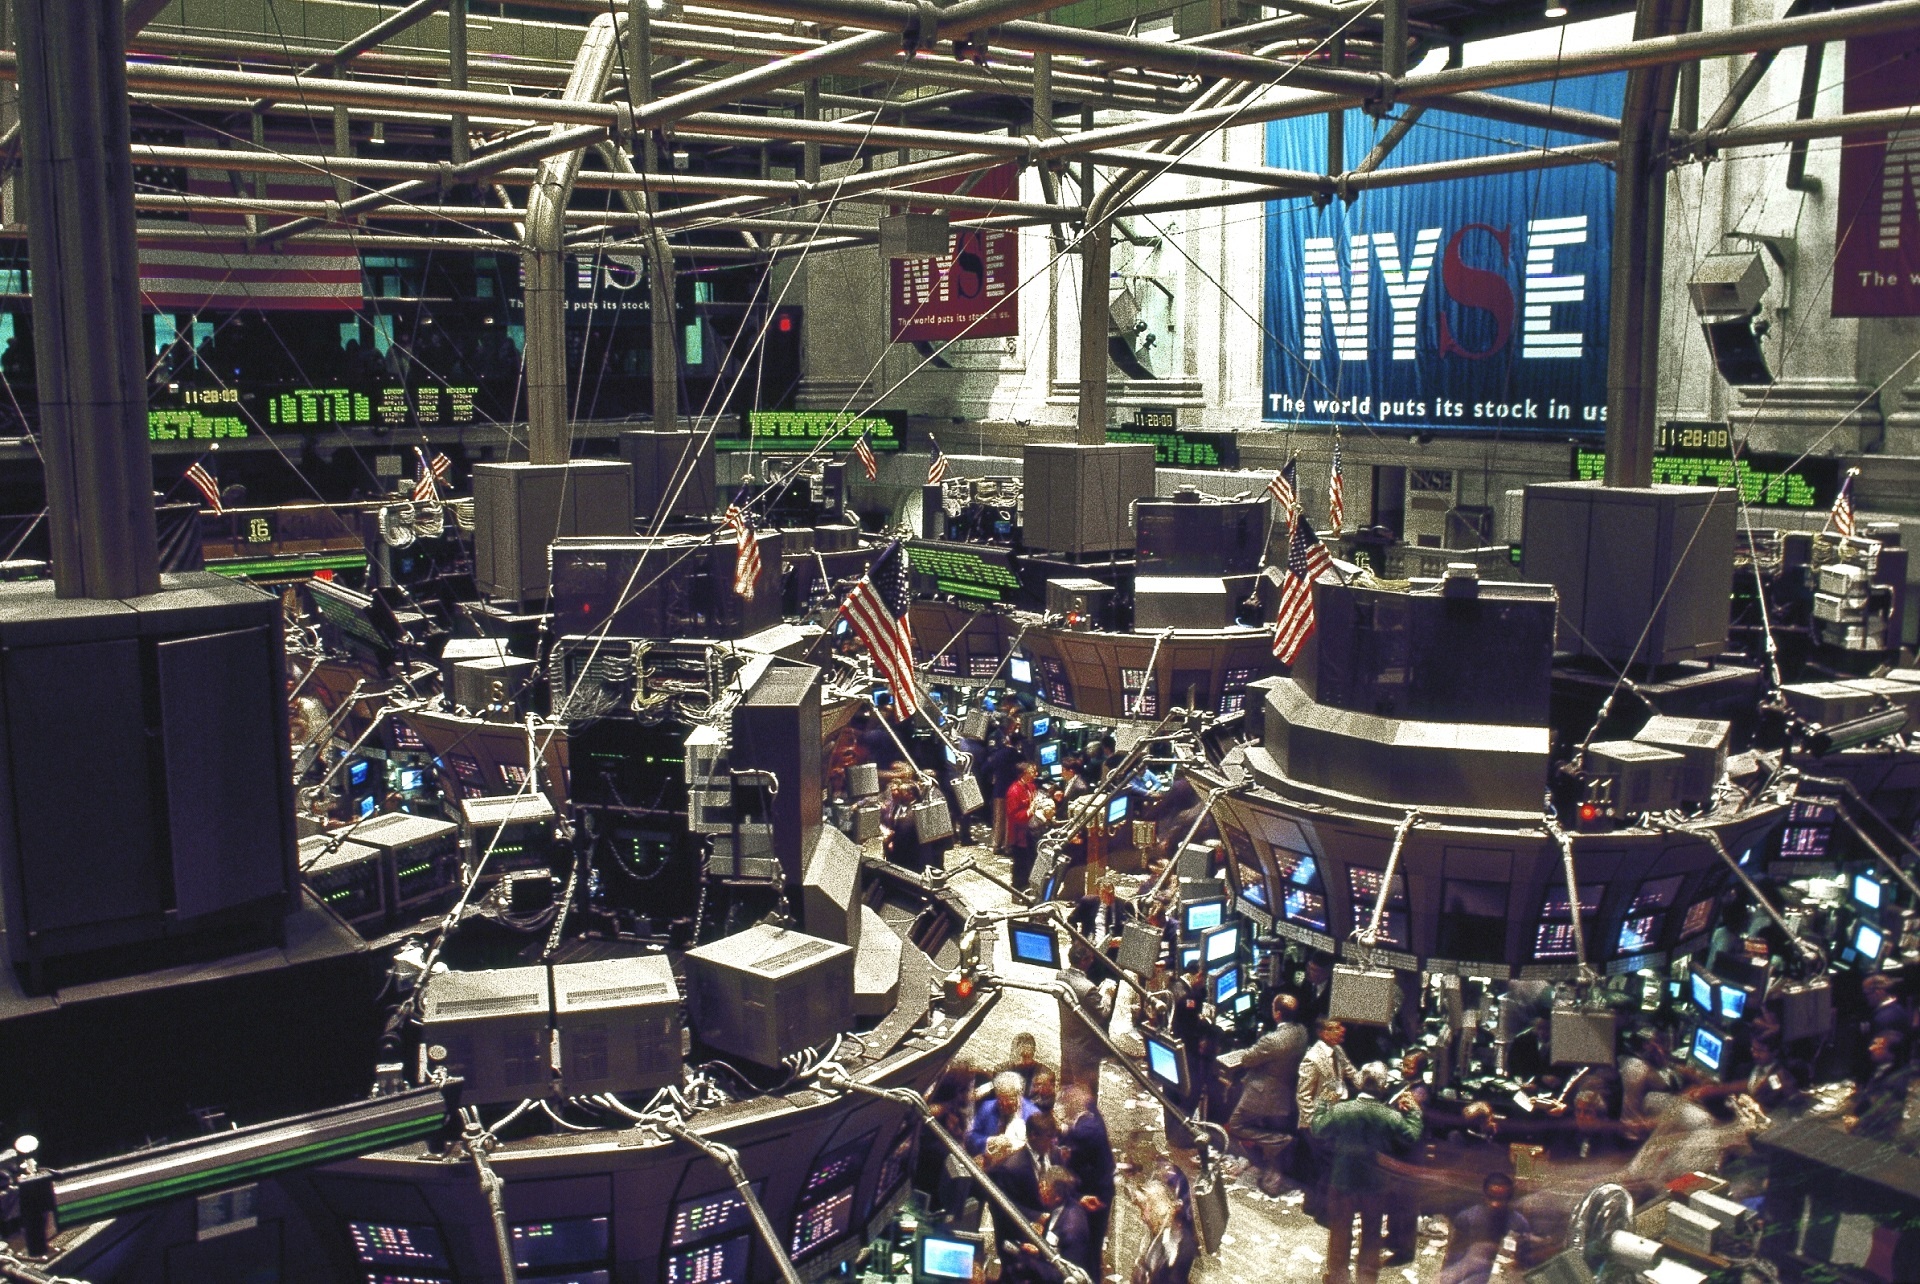 Download free photo of Nyse, new york stock exchange, floor, business, commerce